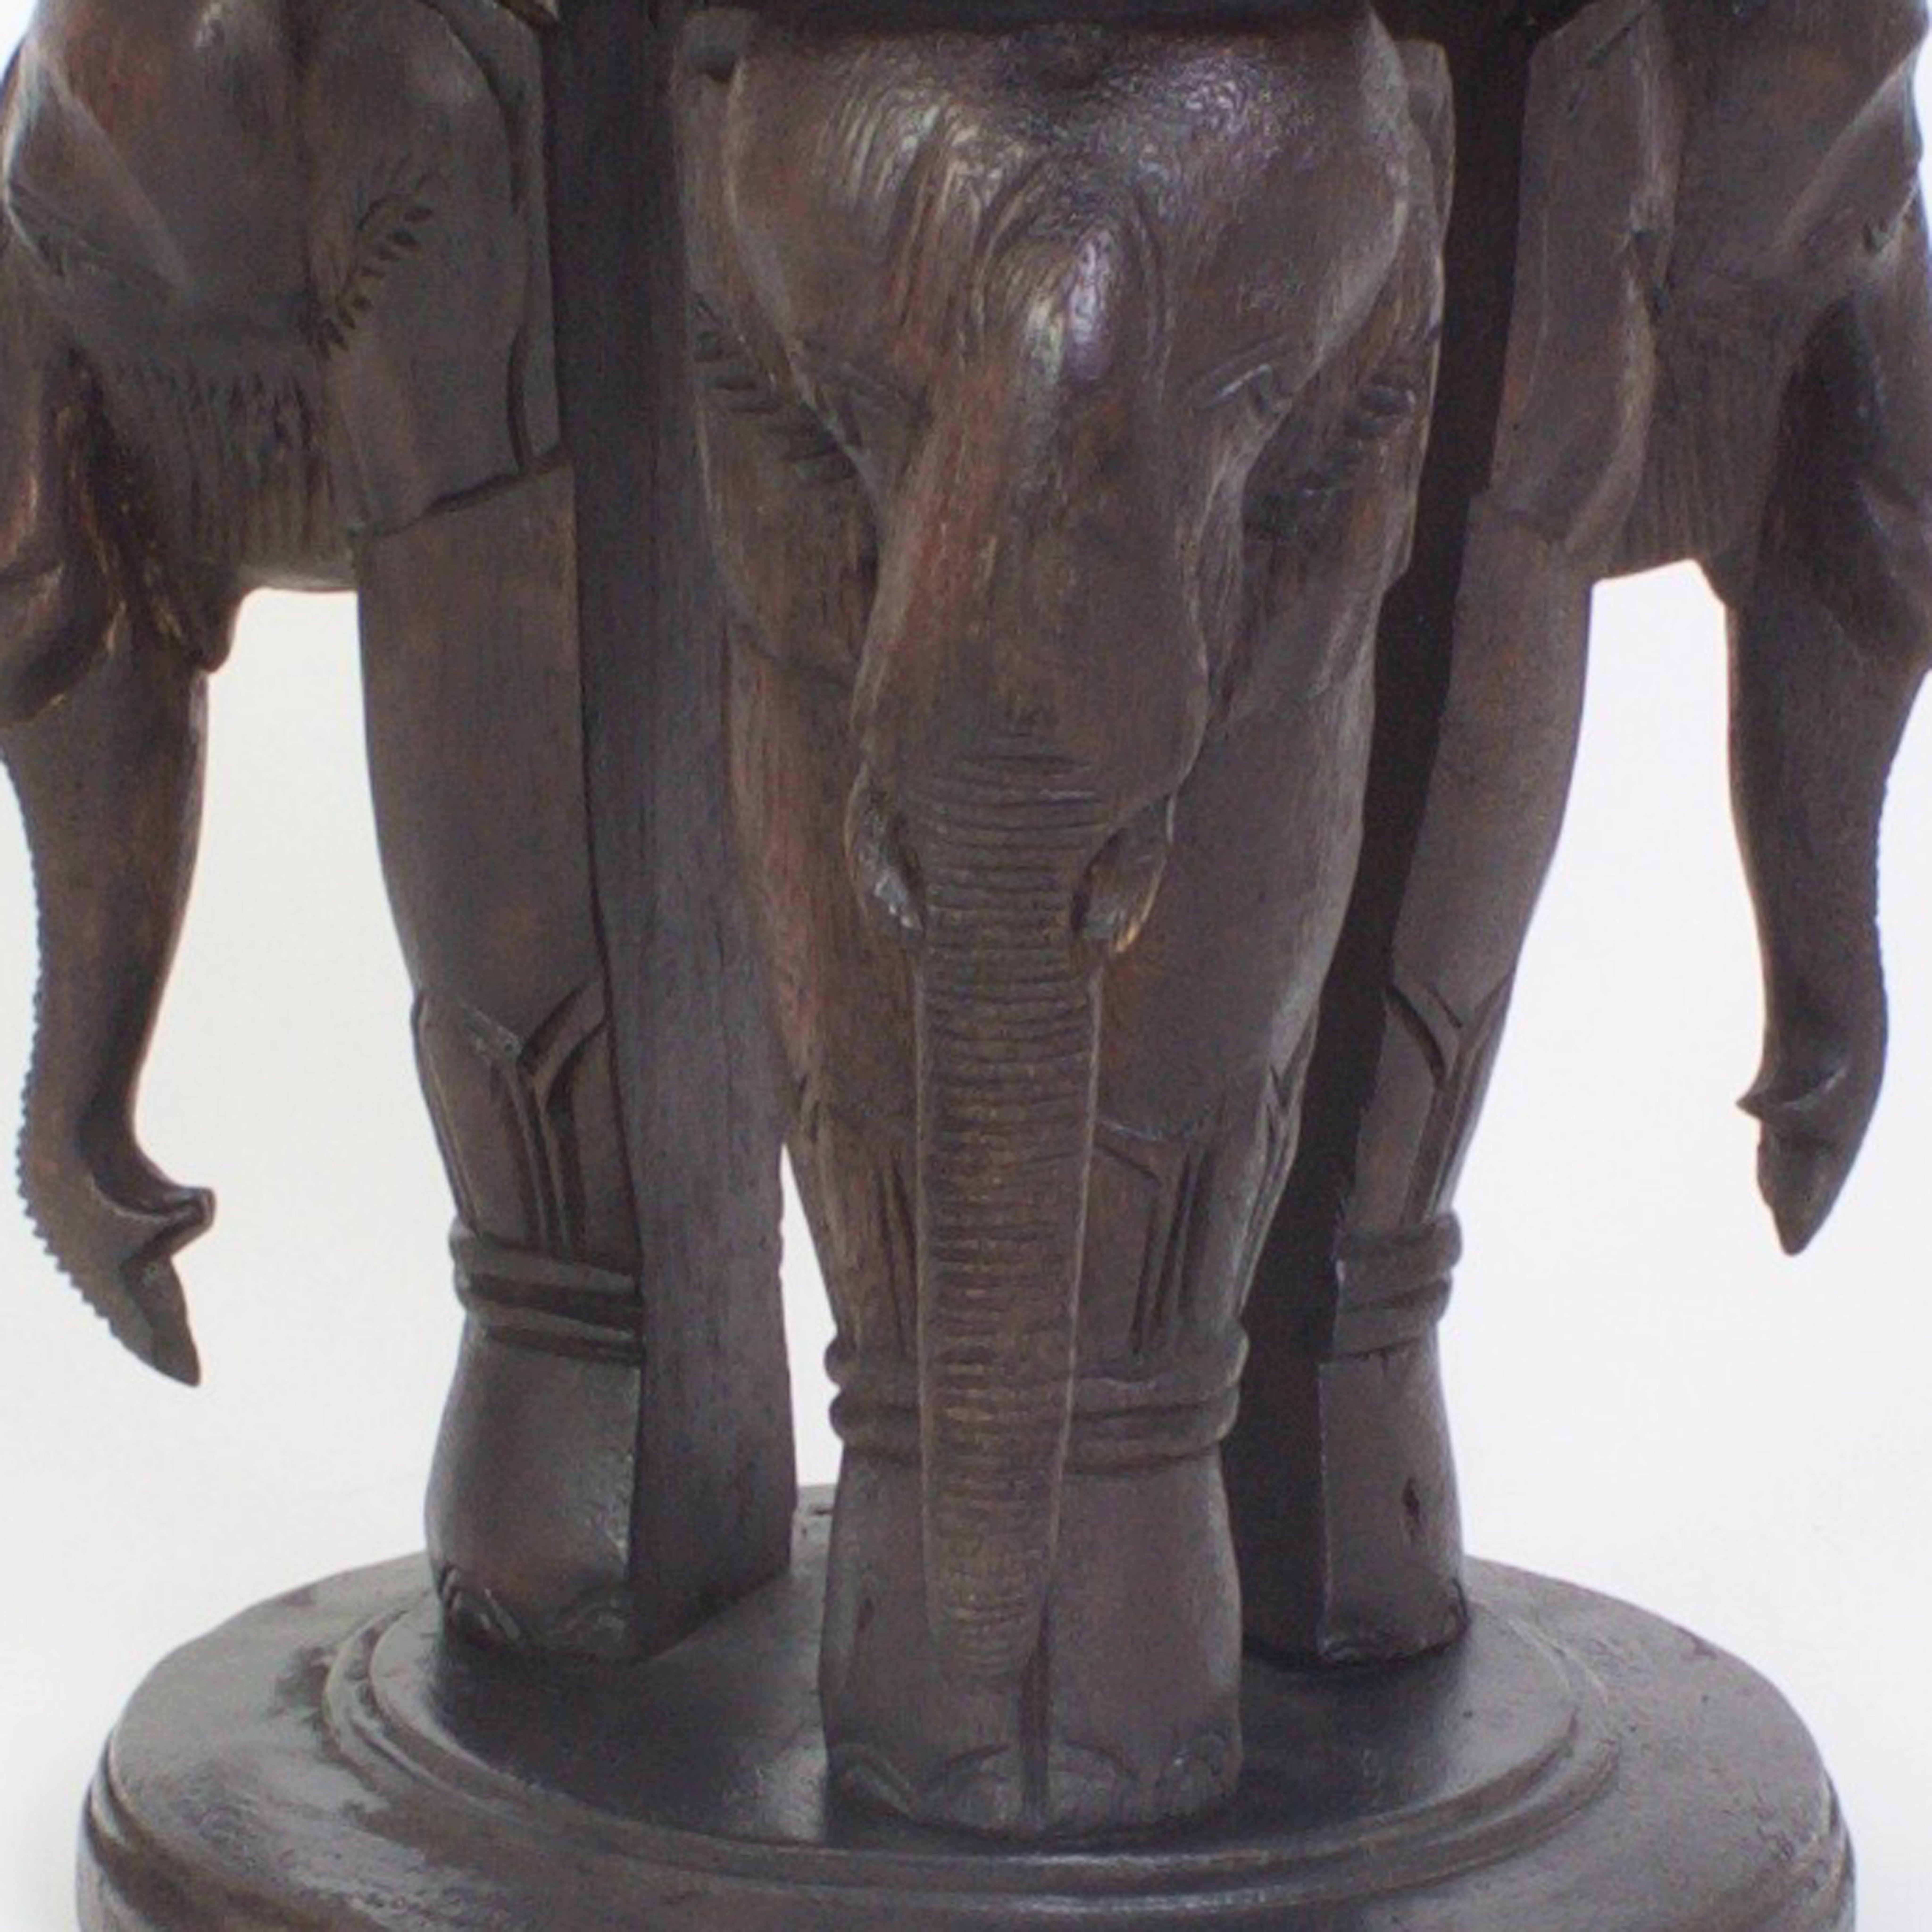 Pair of Elephant Tables, Carved Hardwood Anglo-Indian Style with a Folky Vibe 4